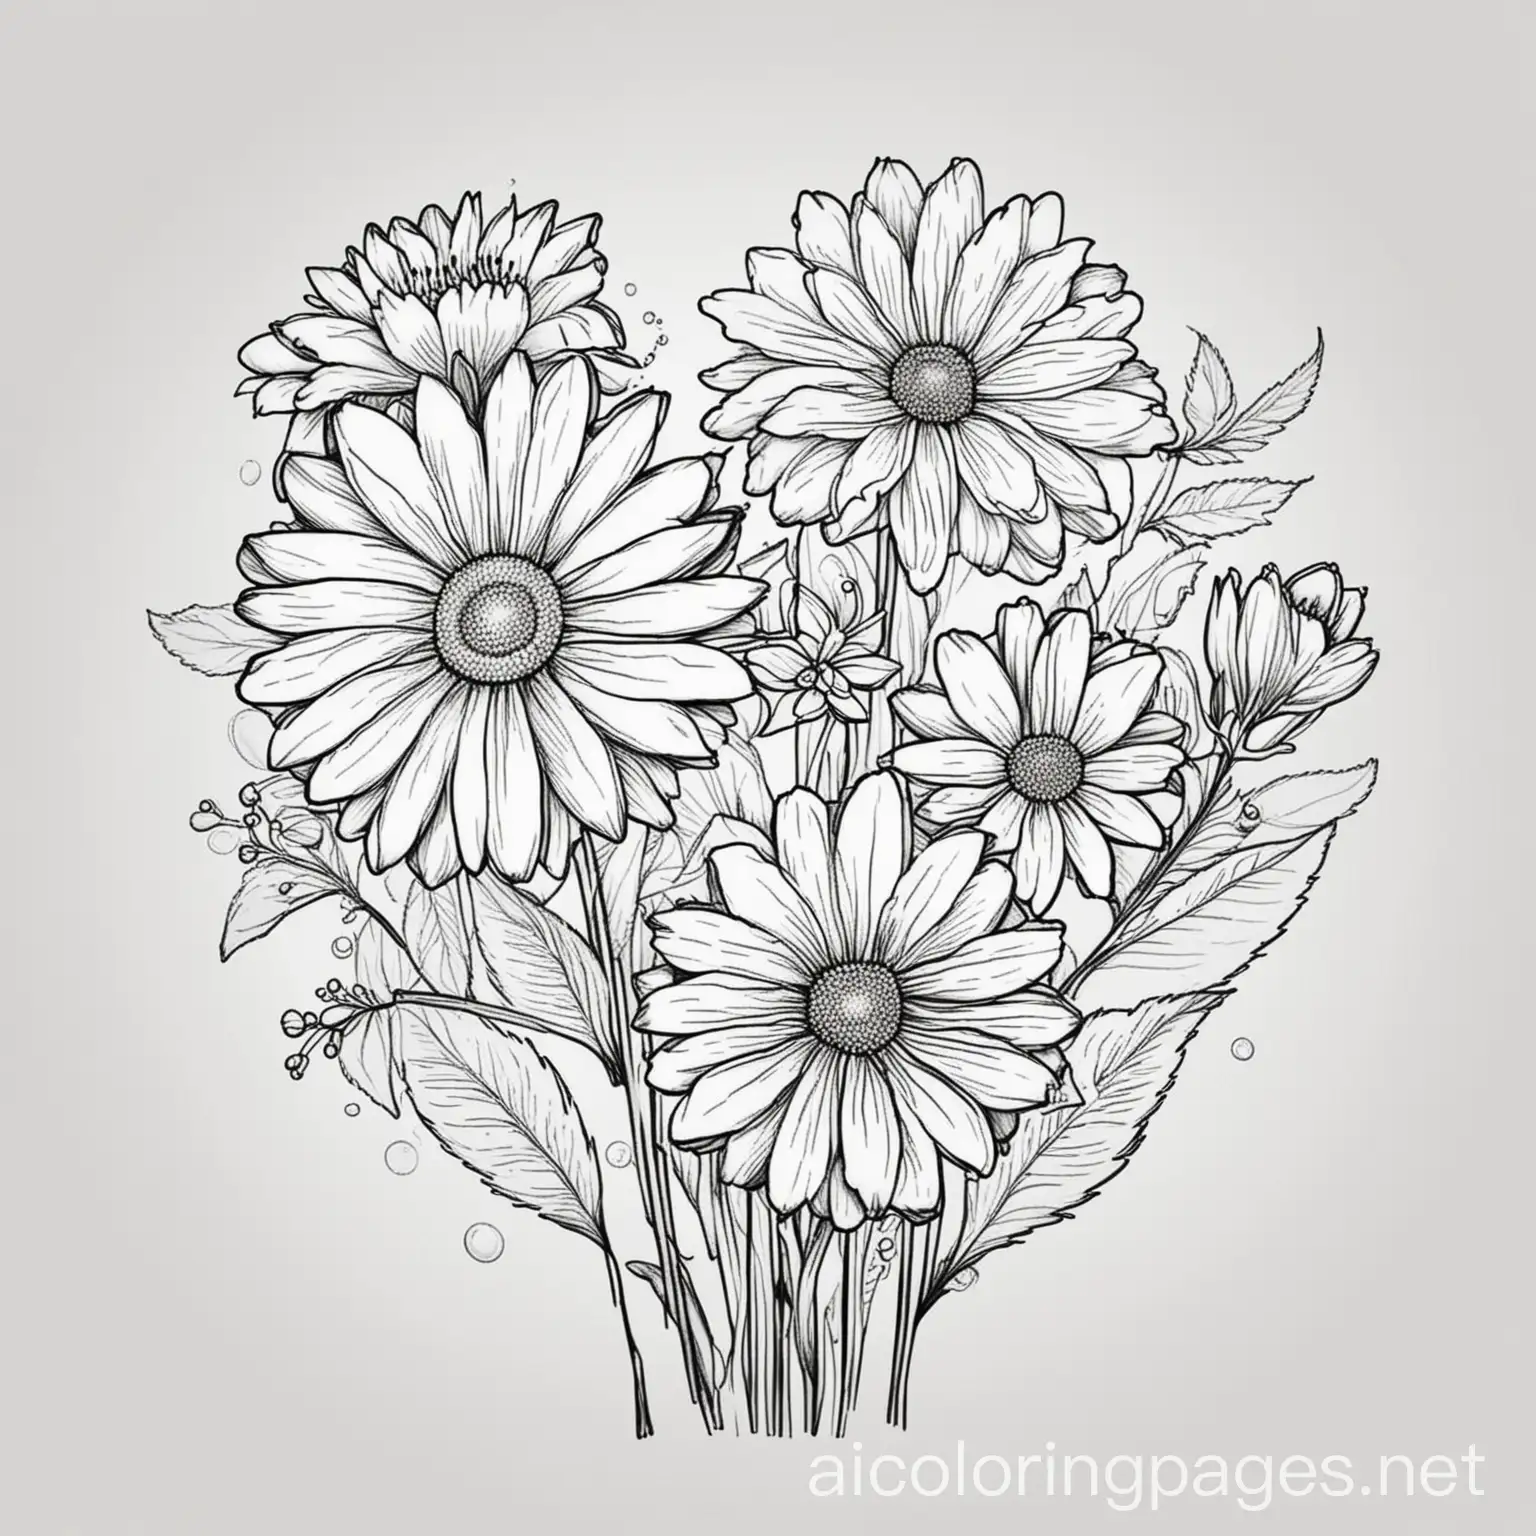 Summer flowers for kids, Coloring Page, black and white, line art, white background, Simplicity, Ample White Space. The background of the coloring page is plain white to make it easy for young children to color within the lines. The outlines of all the subjects are easy to distinguish, making it simple for kids to color without too much difficulty